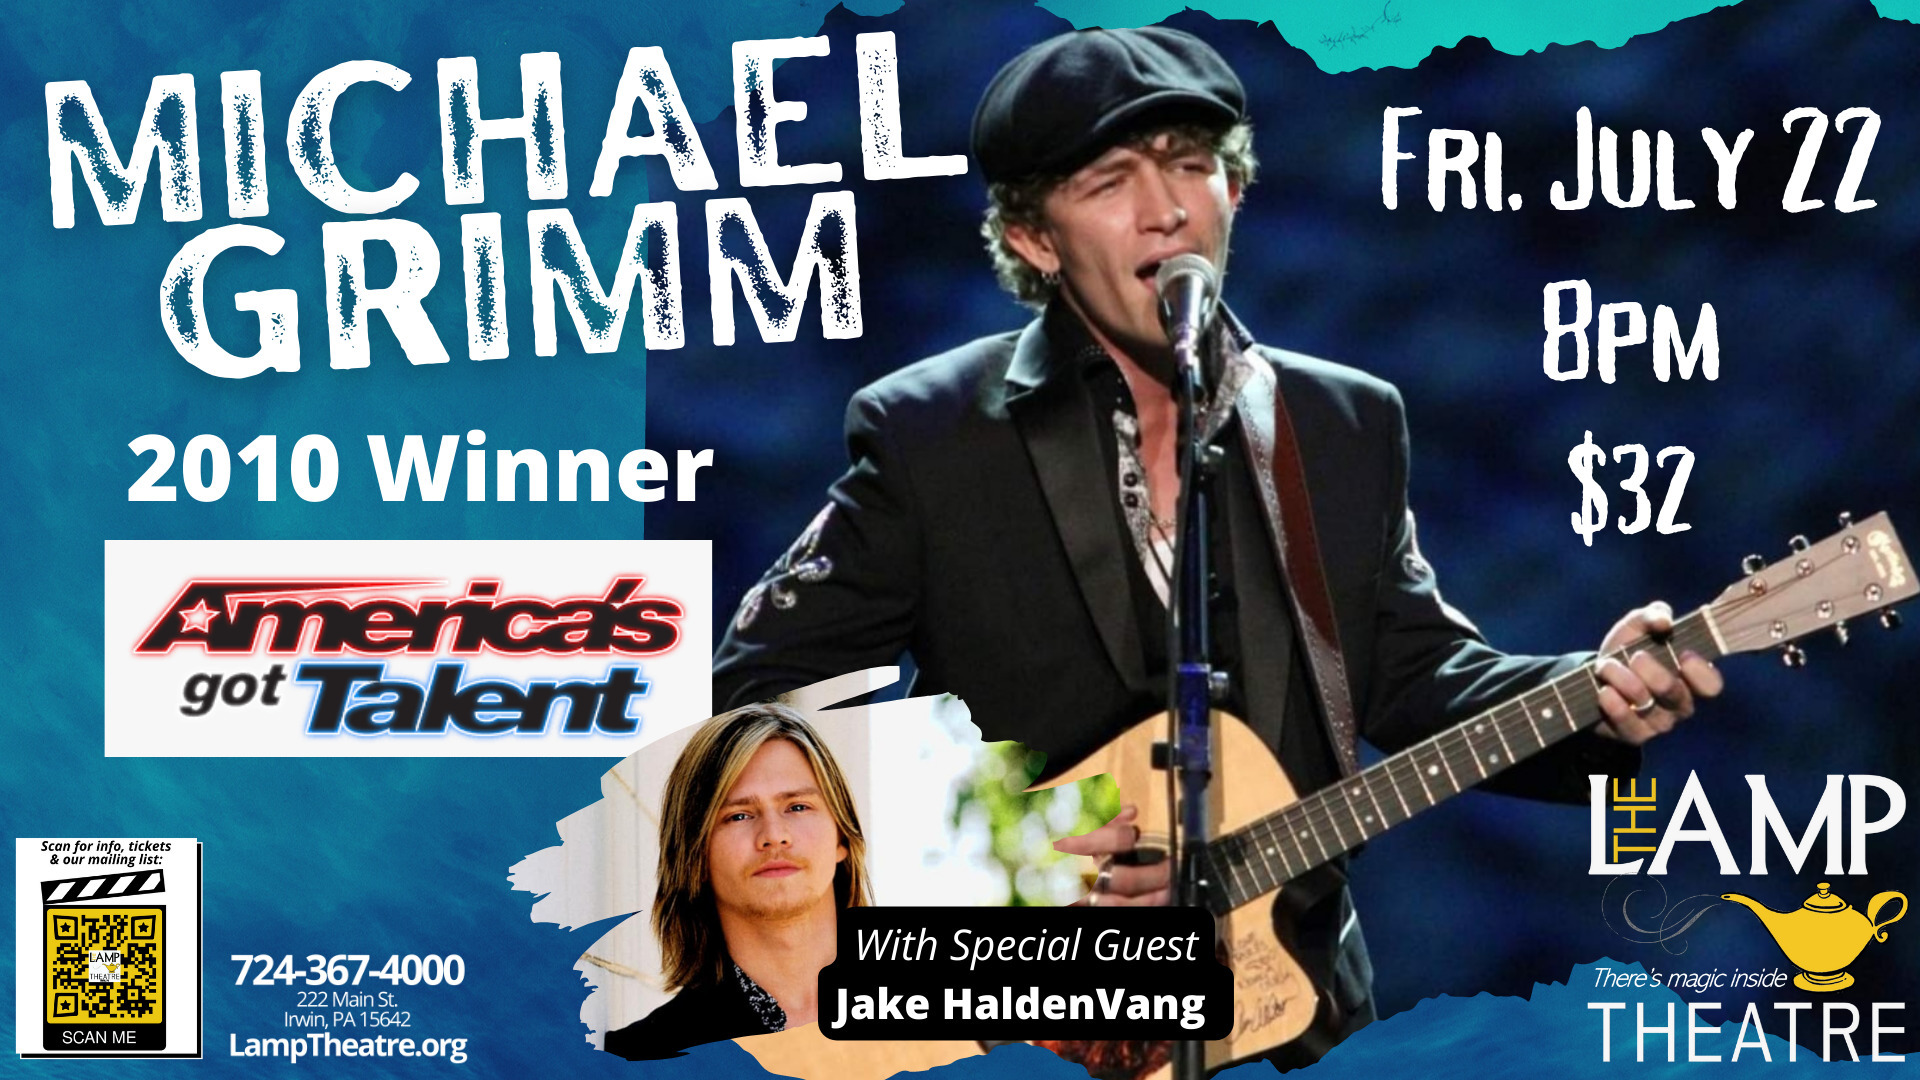 Michael Grimm w/special guest Jake HaldenVang, Irwin, Pennsylvania, United States